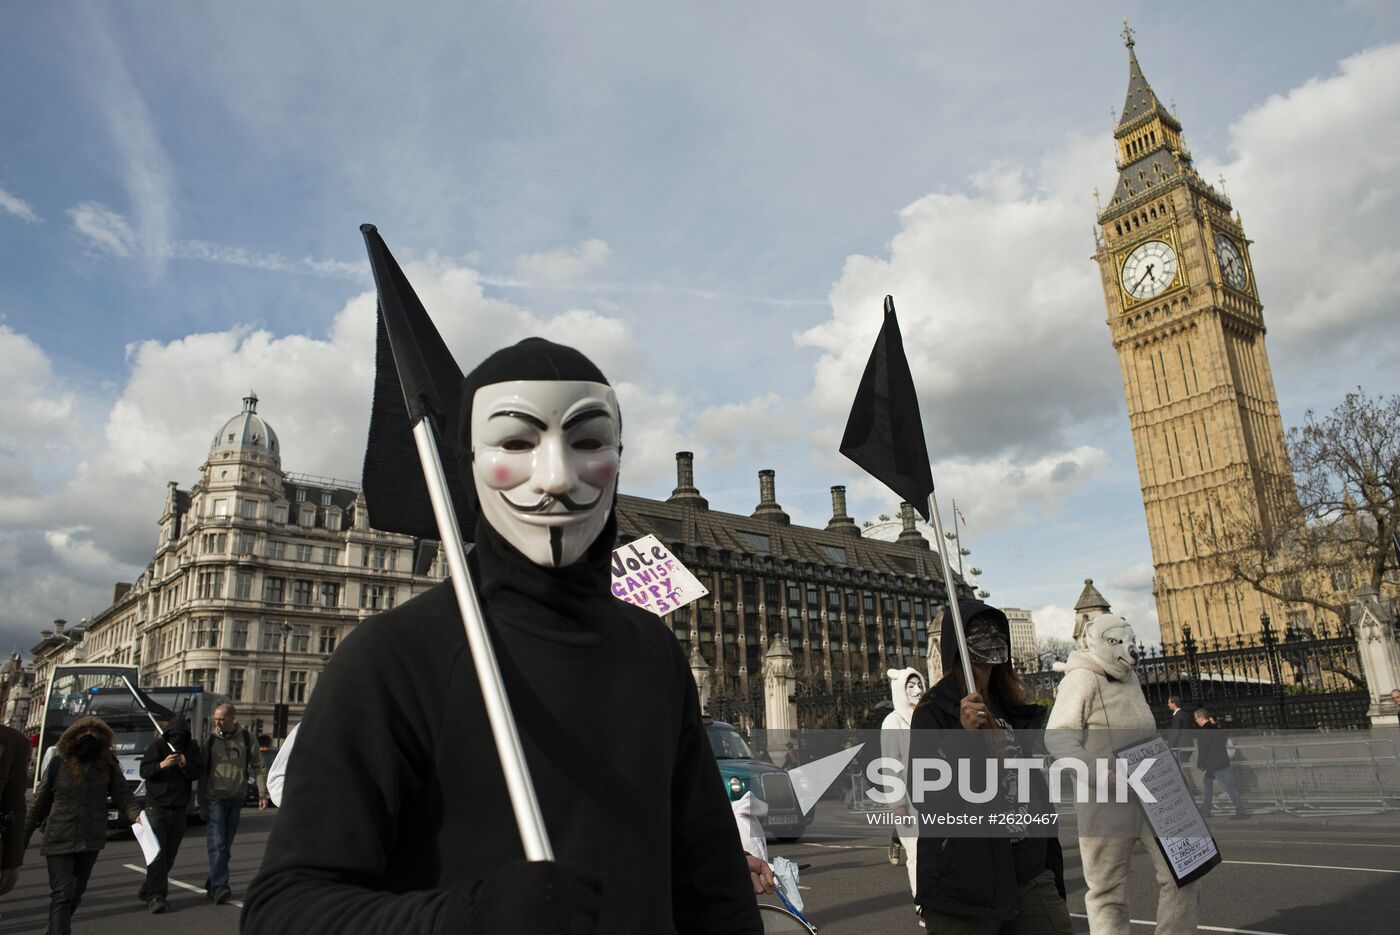 Occupy Democracy picket in London